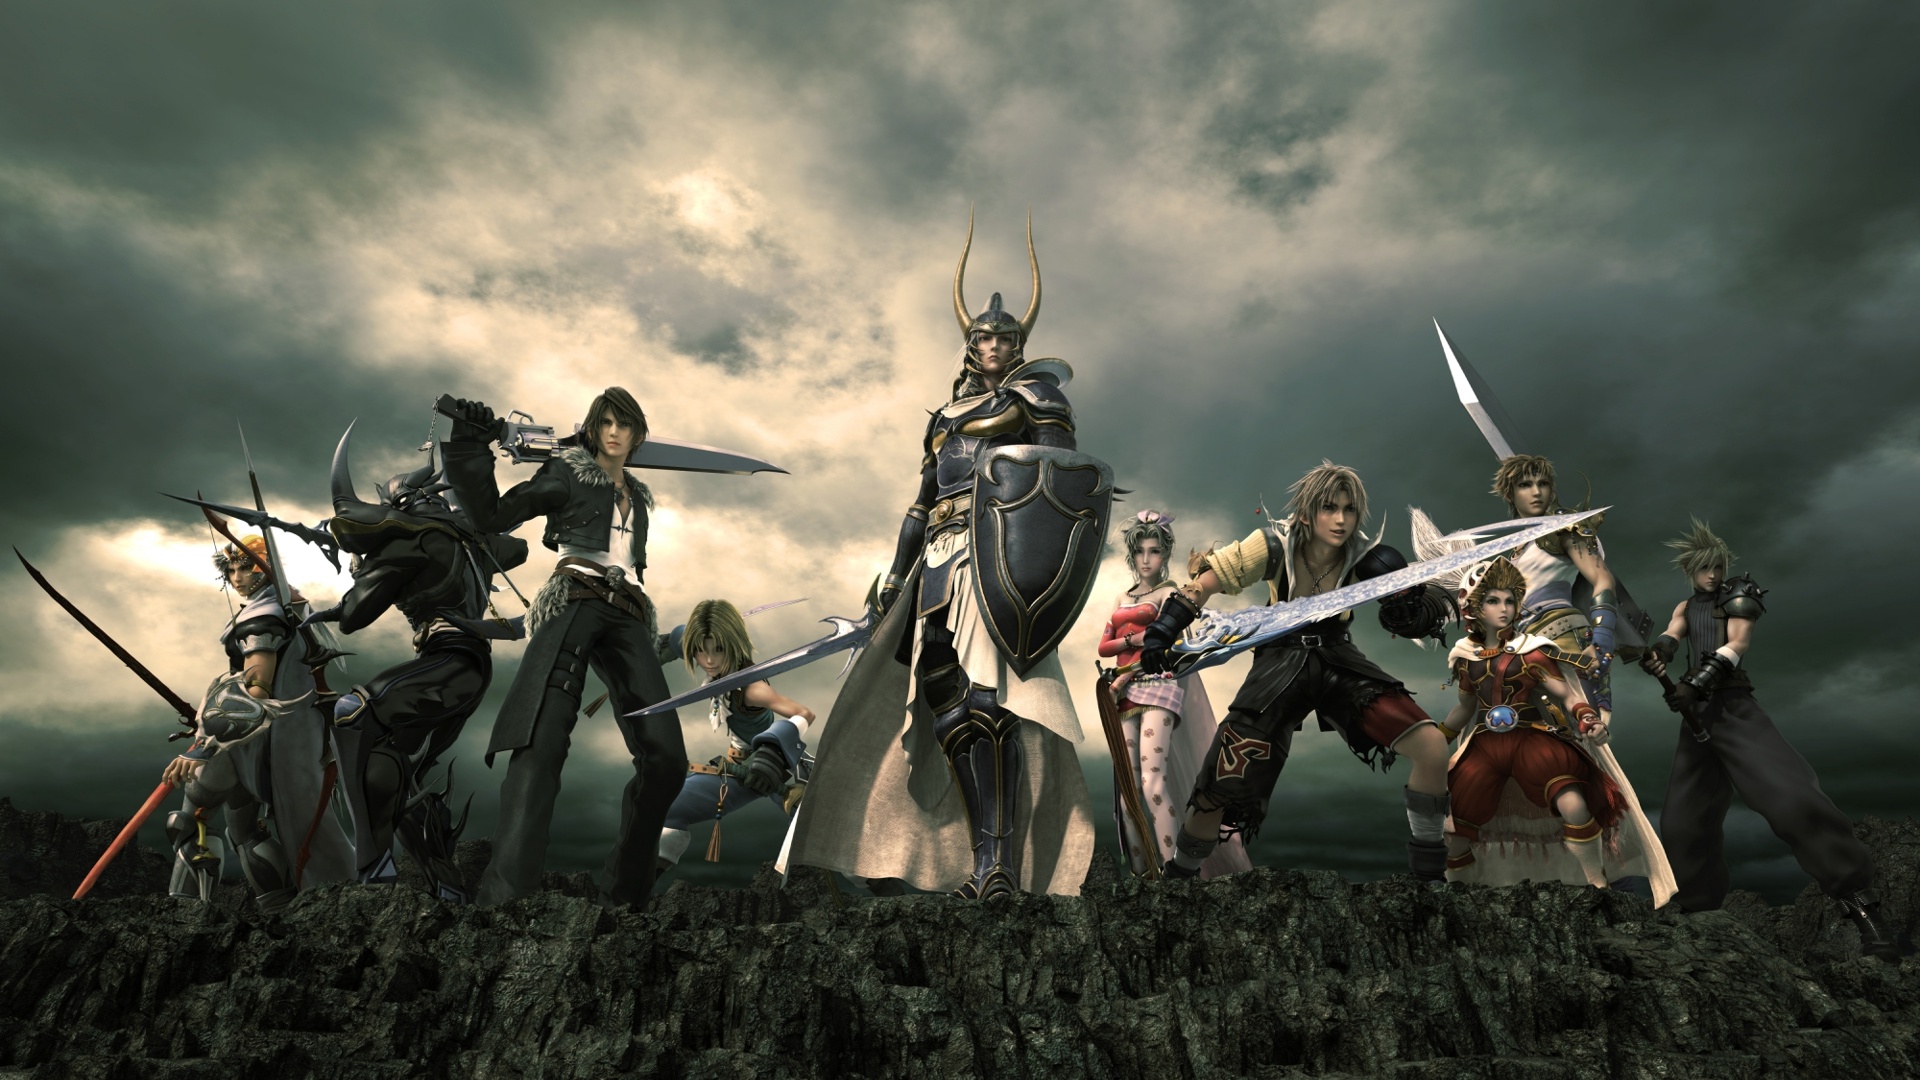 The Top 6 Best Main Final Fantasy Games - The Koalition